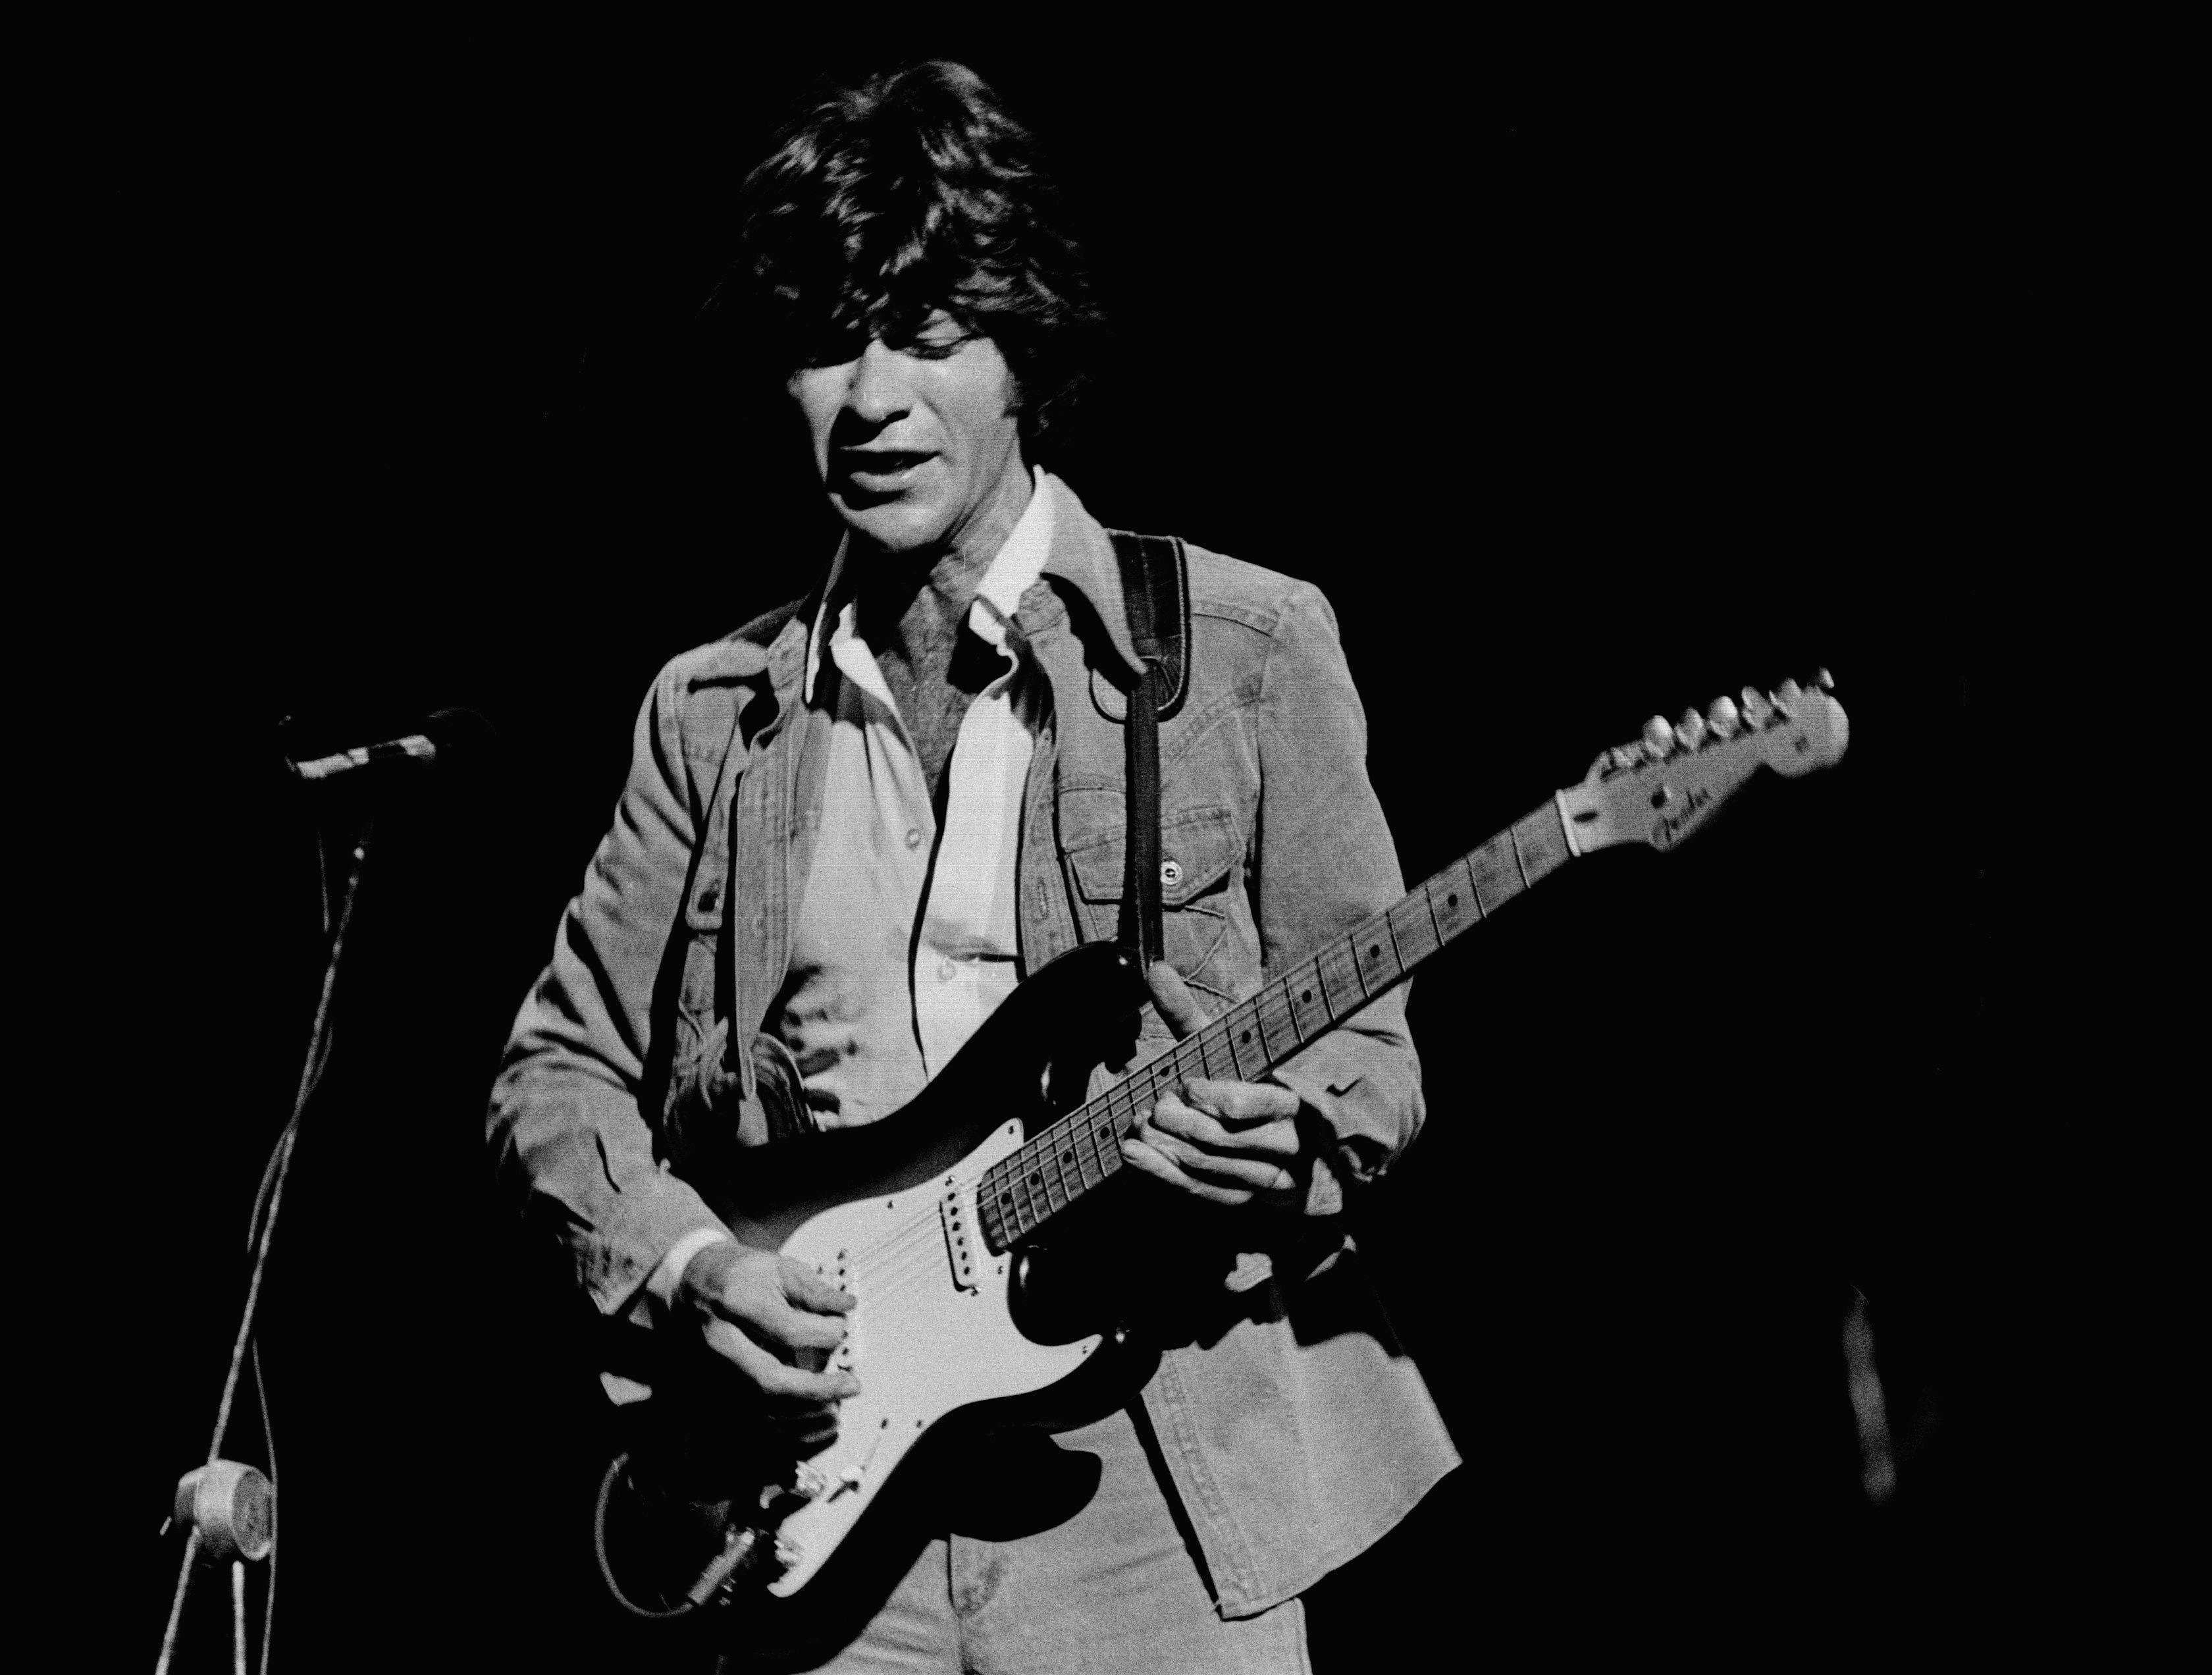 See The Band's Robbie Robertson explain how his Martin guitar inspired ...